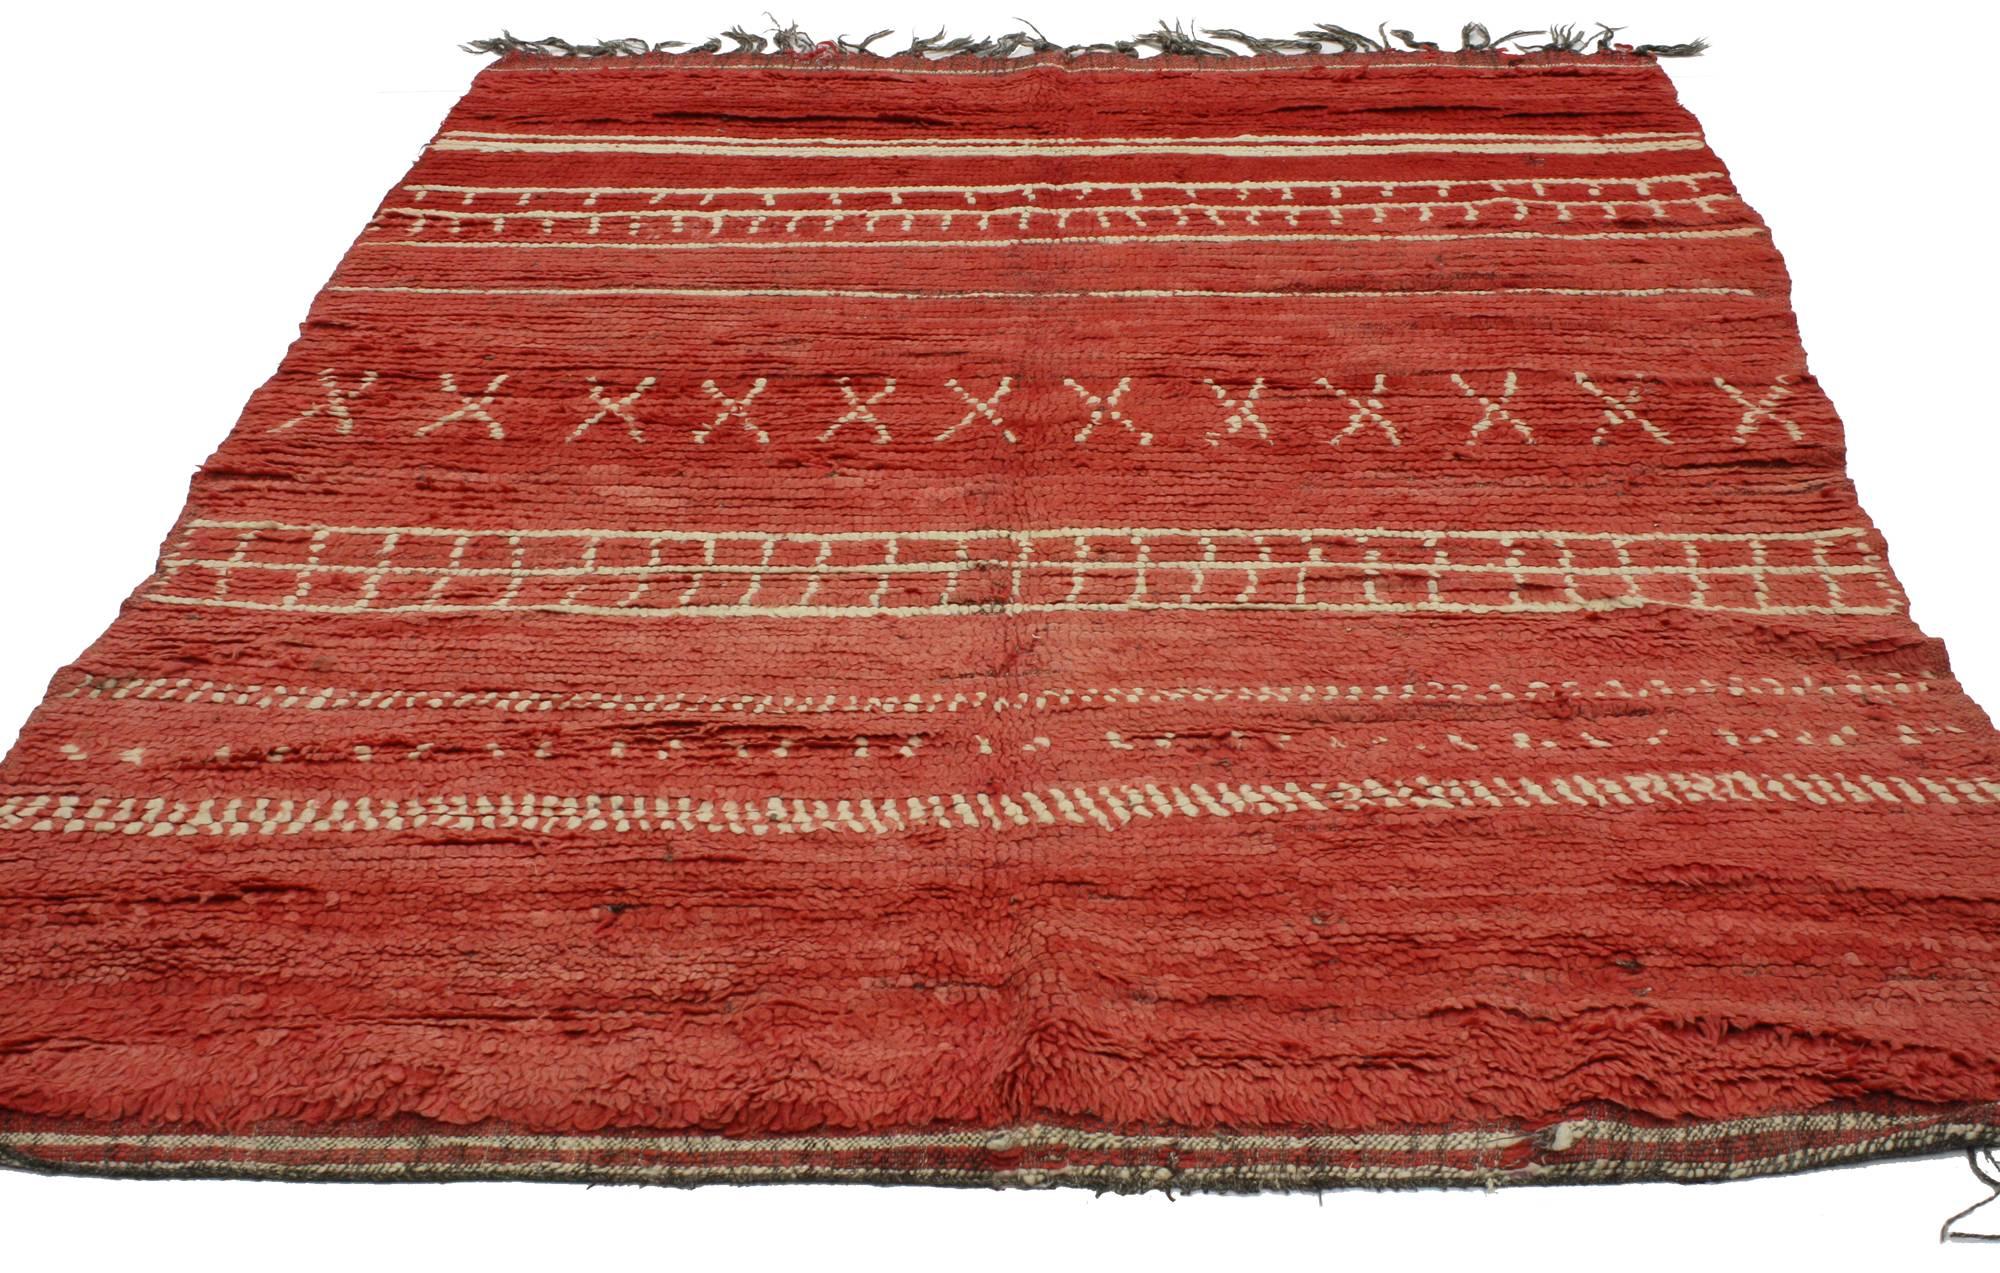 20268 vintage red Moroccan rug, Tribal Berber Moroccan rug. This hand knitted wool vintage Berber Moroccan rug features a variety of reproduction motifs. Taking center stage, a repeating band of X-shape motifs is flanked on either side with bands of